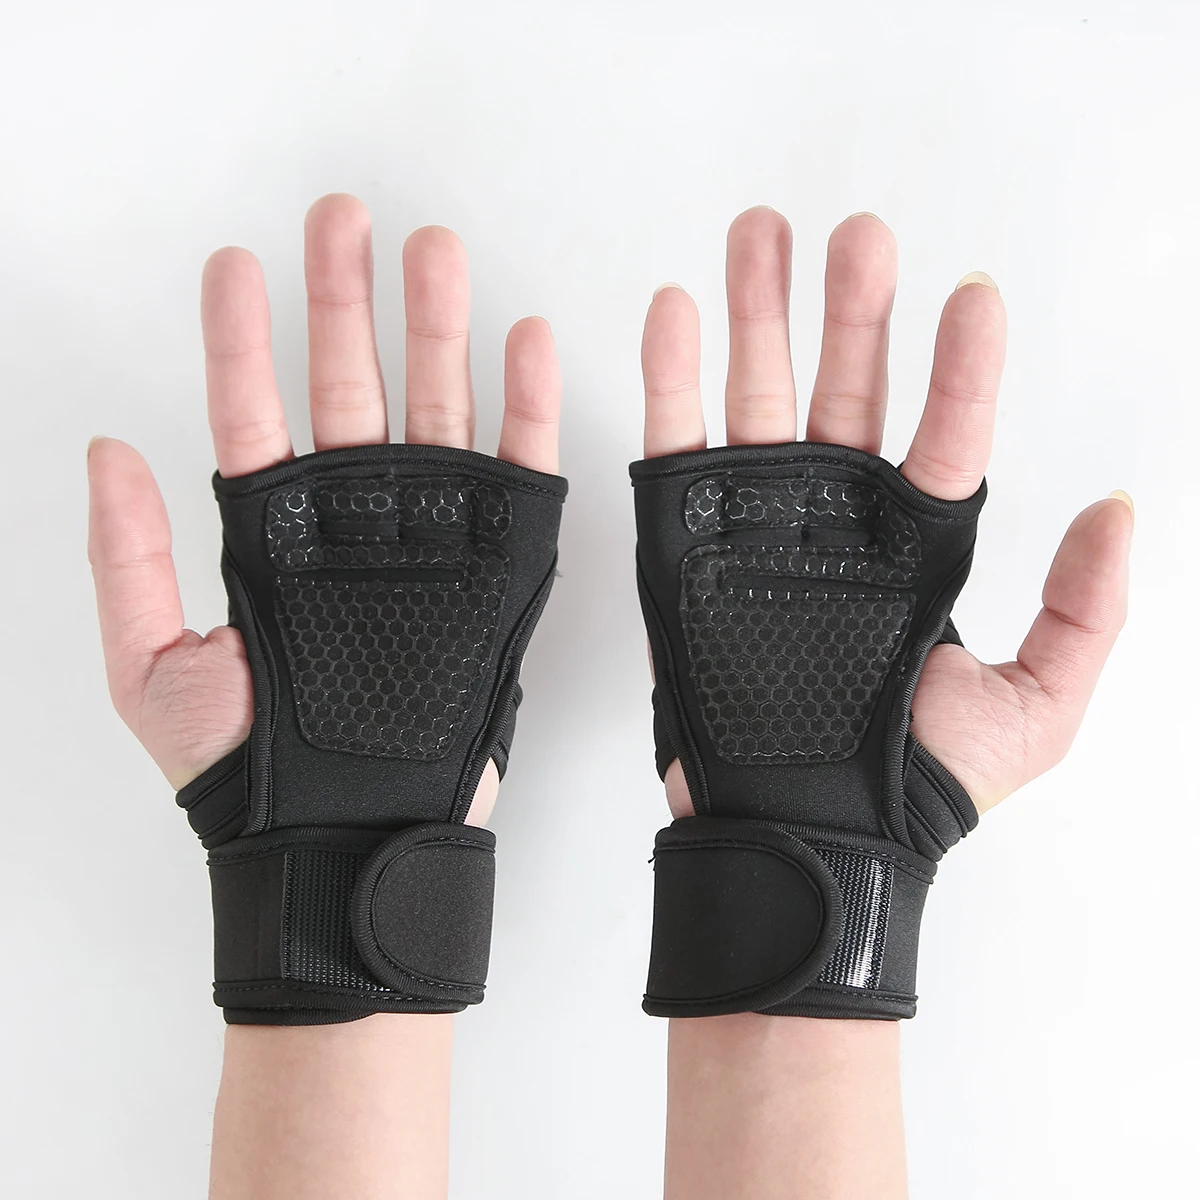 hand gloves for gym